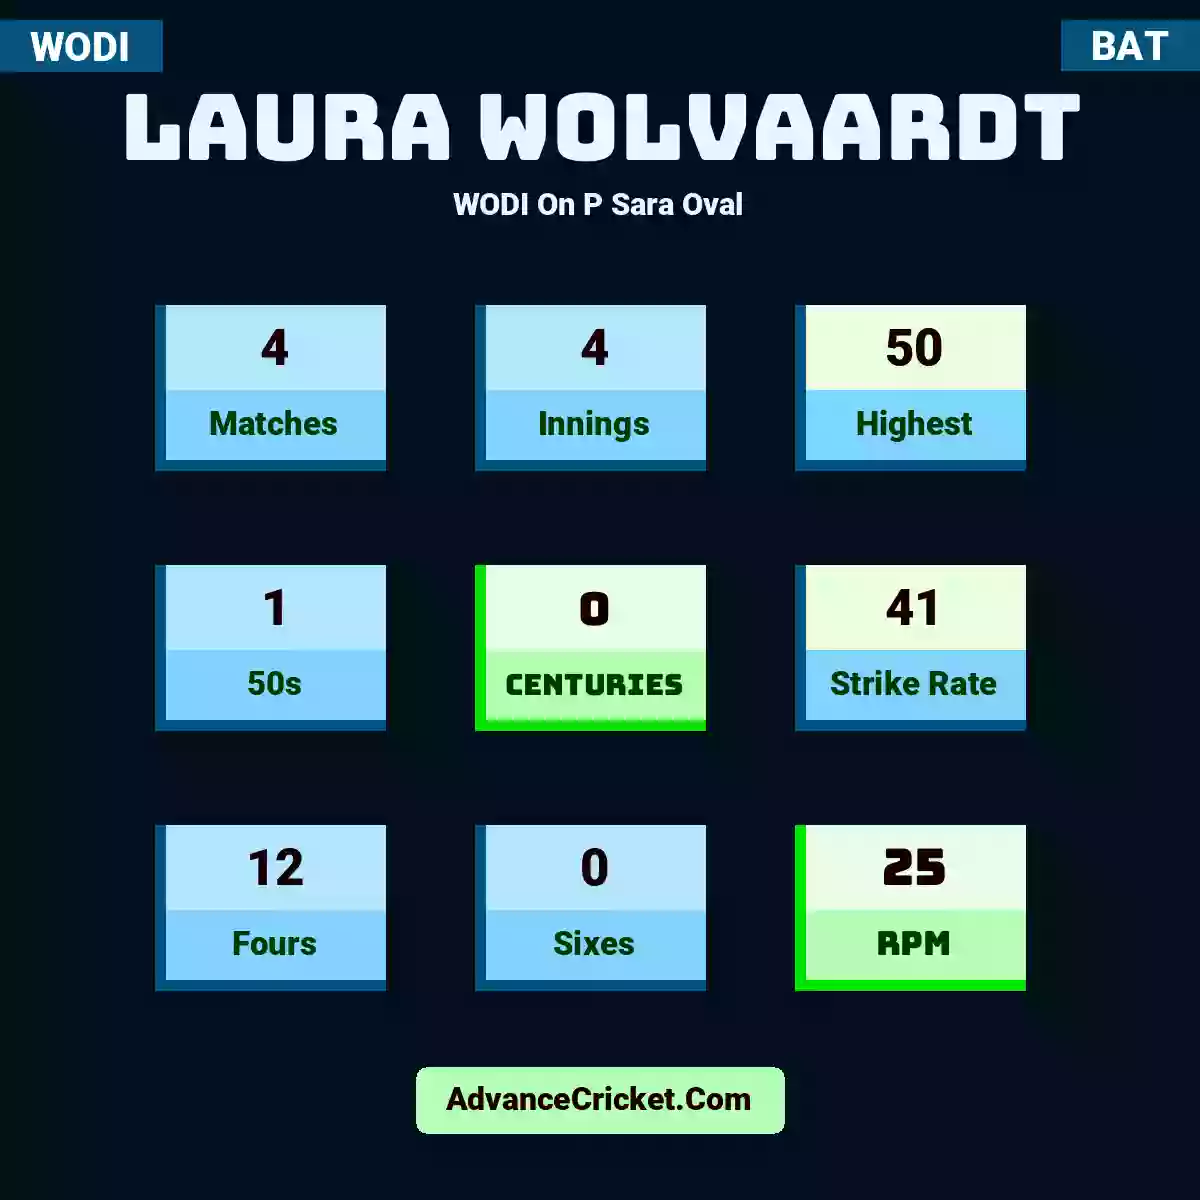 Laura Wolvaardt WODI  On P Sara Oval, Laura Wolvaardt played 4 matches, scored 50 runs as highest, 1 half-centuries, and 0 centuries, with a strike rate of 41. L.Wolvaardt hit 12 fours and 0 sixes, with an RPM of 25.